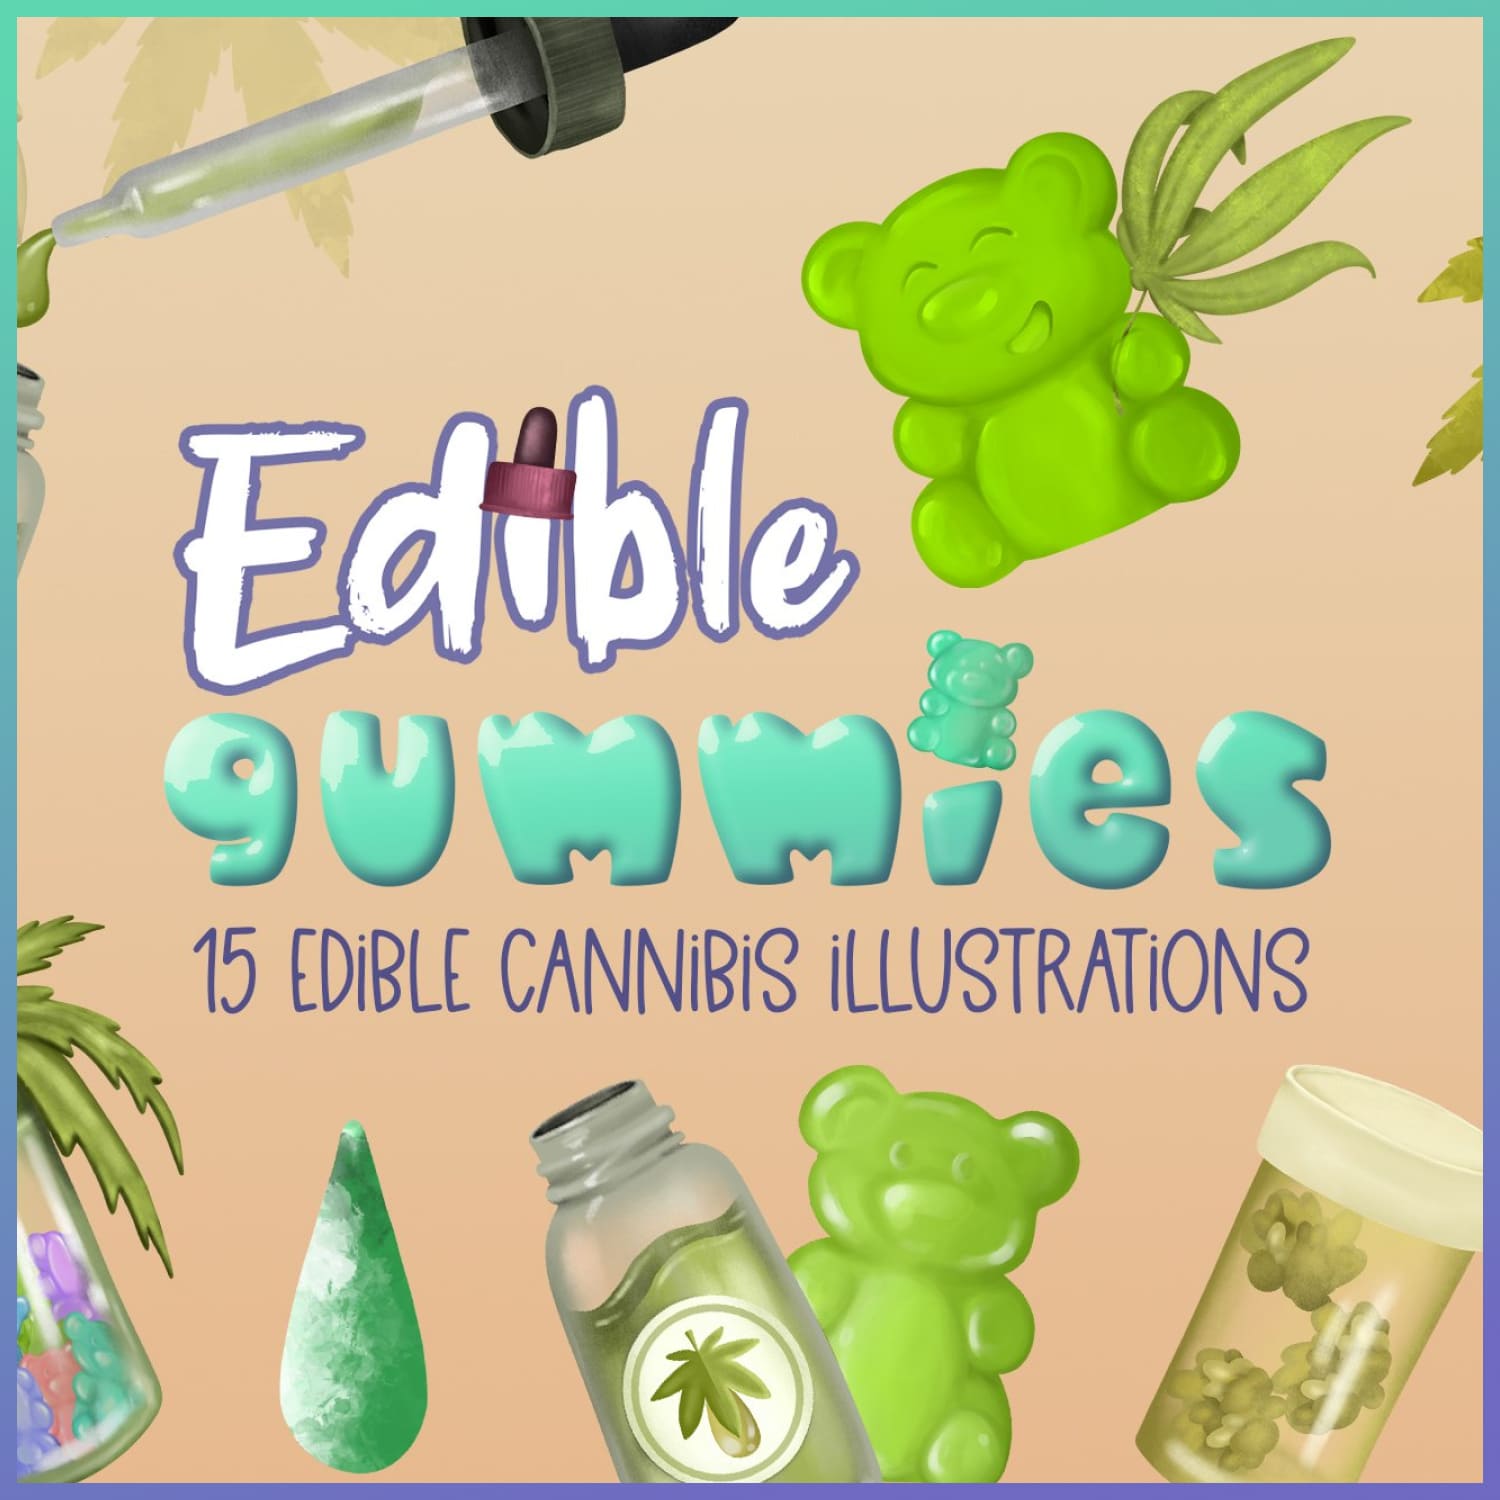 Edible Cannibis Illustration Clipart - main image preview.